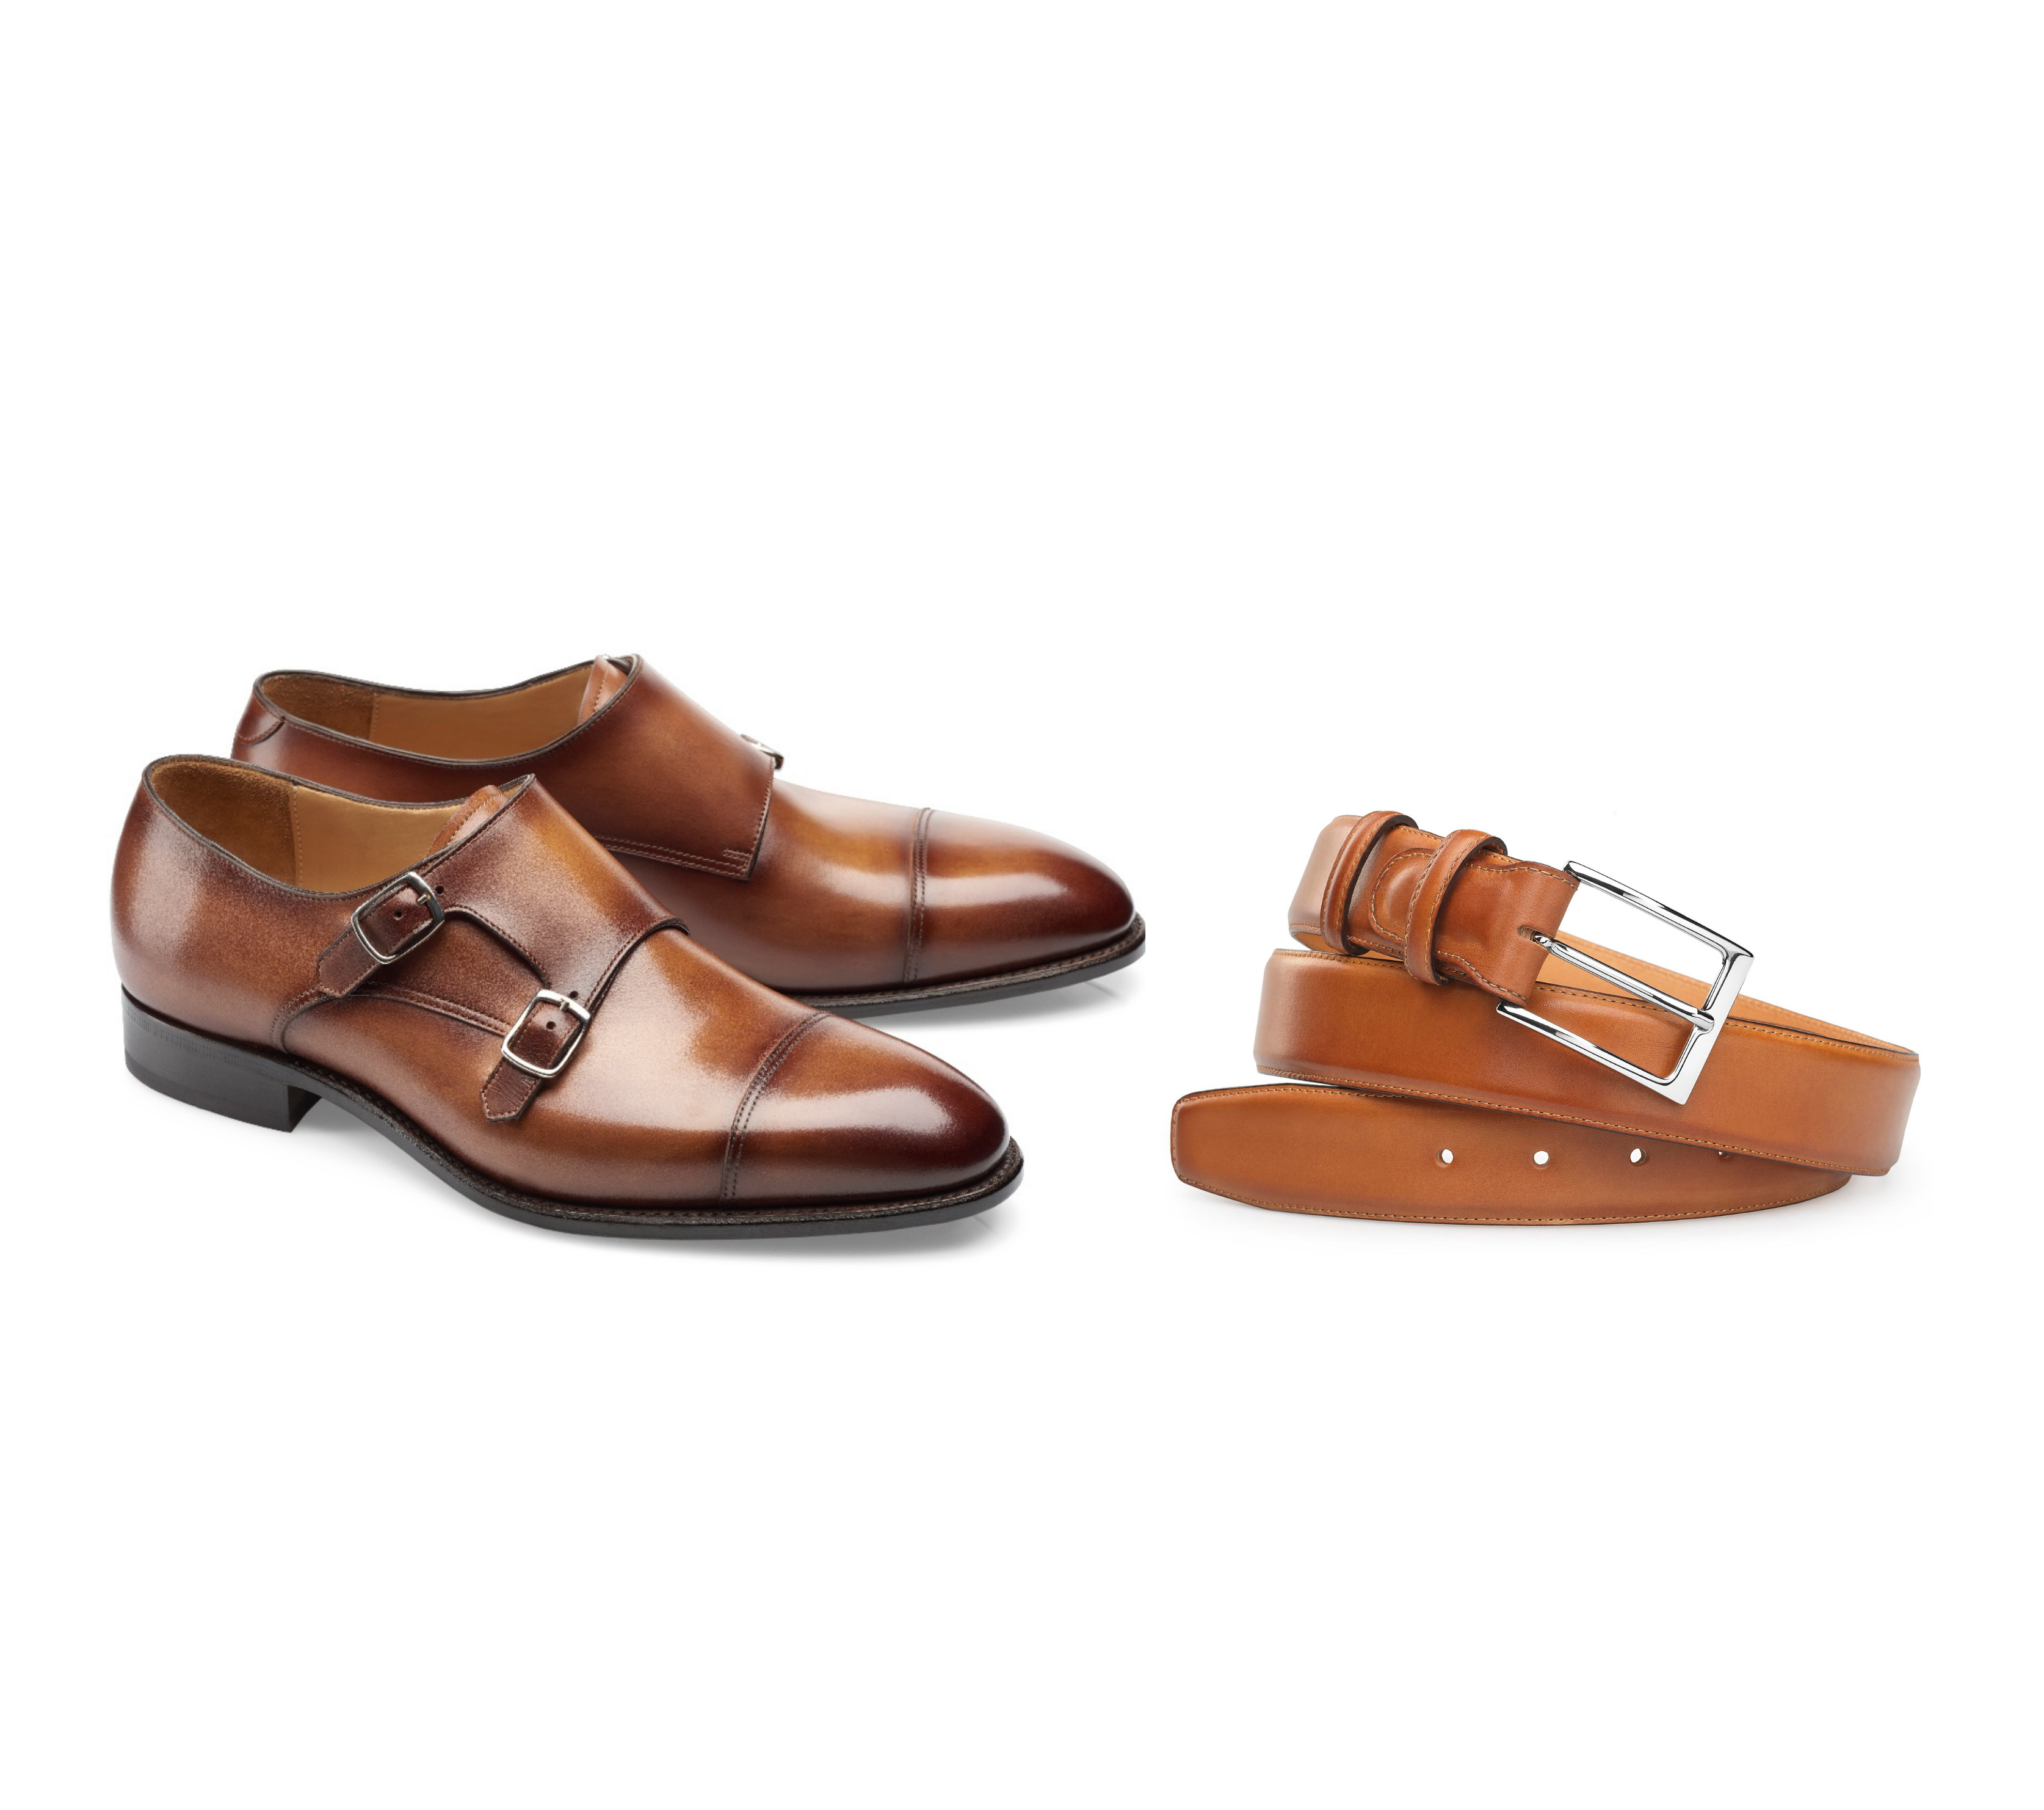 Double Buckle Shoes - Leather - PM Andrew Braga